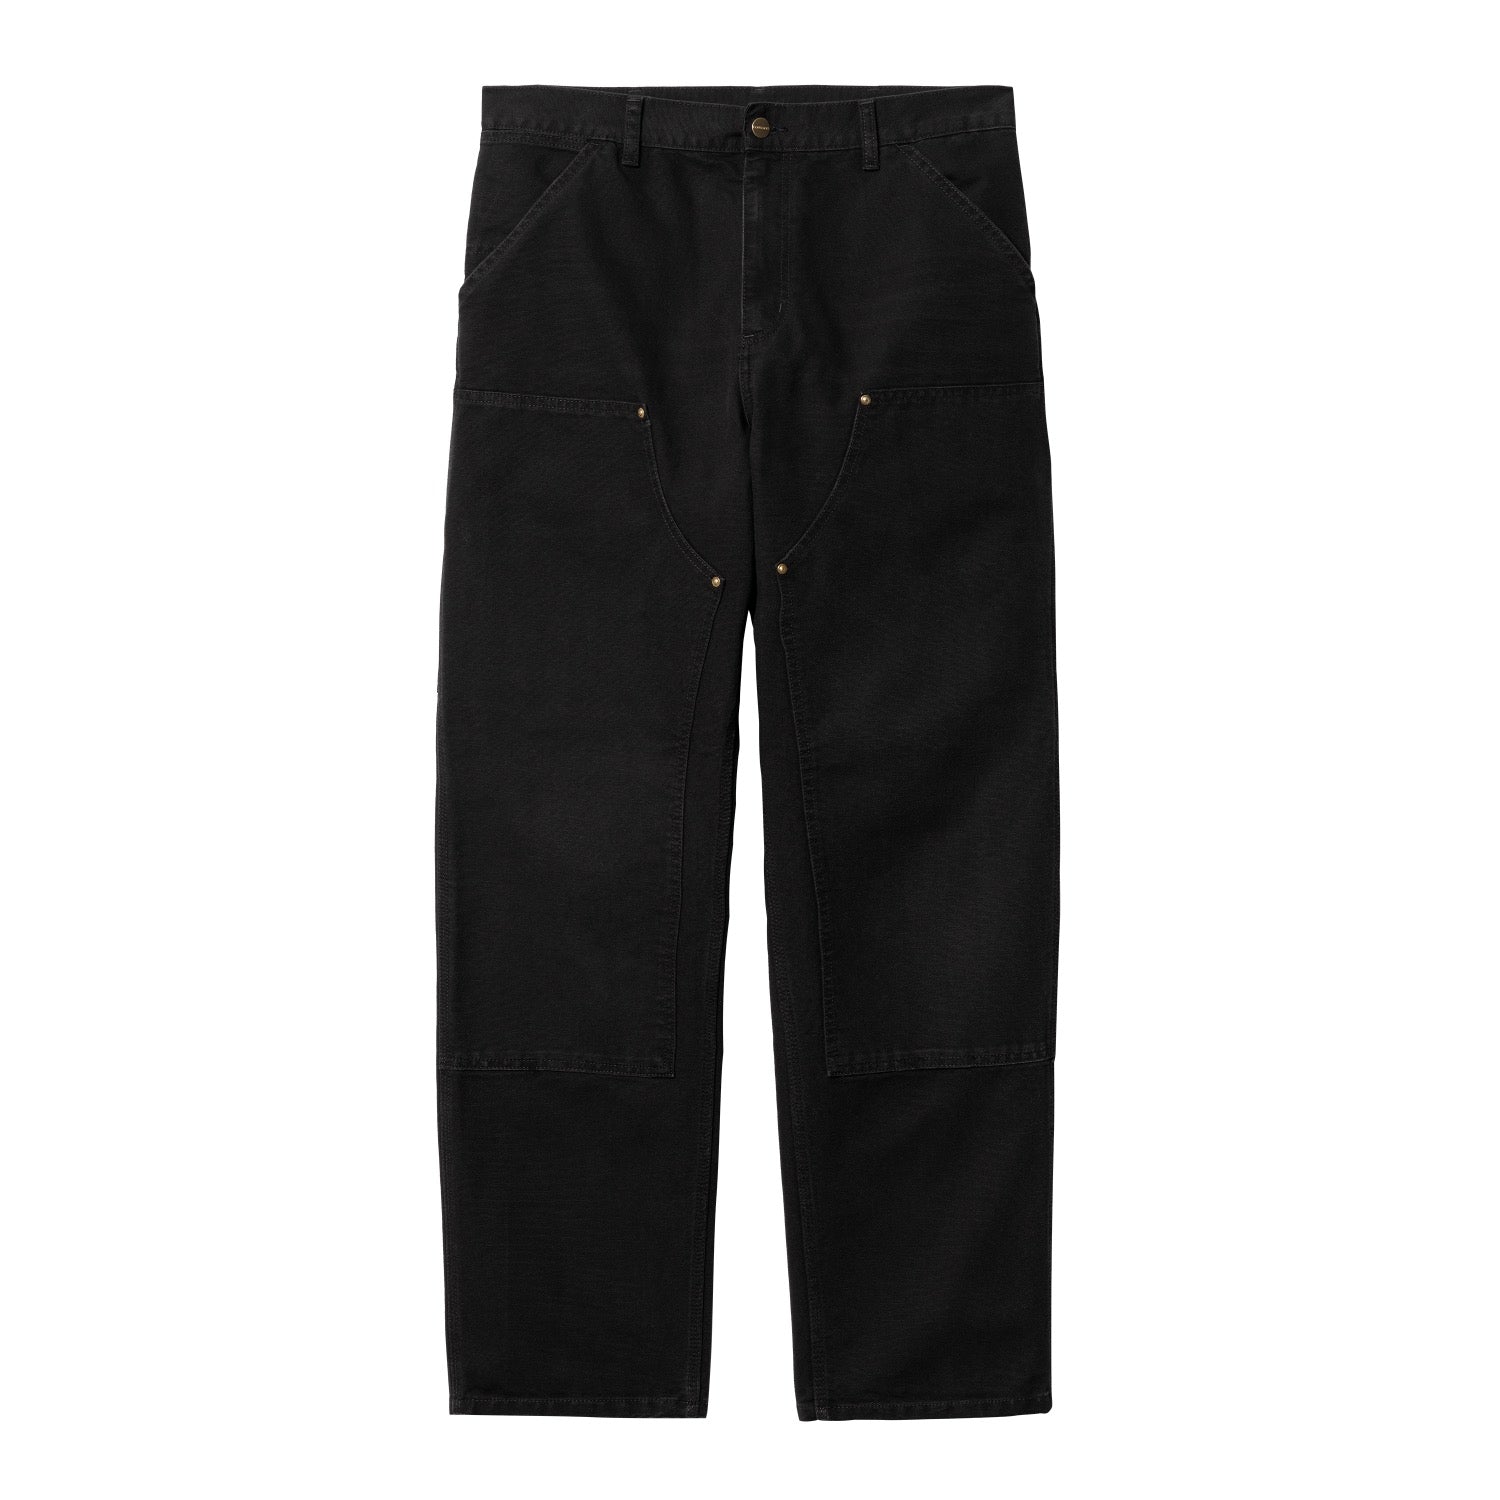 DOUBLE KNEE PANT - Black (aged canvas)